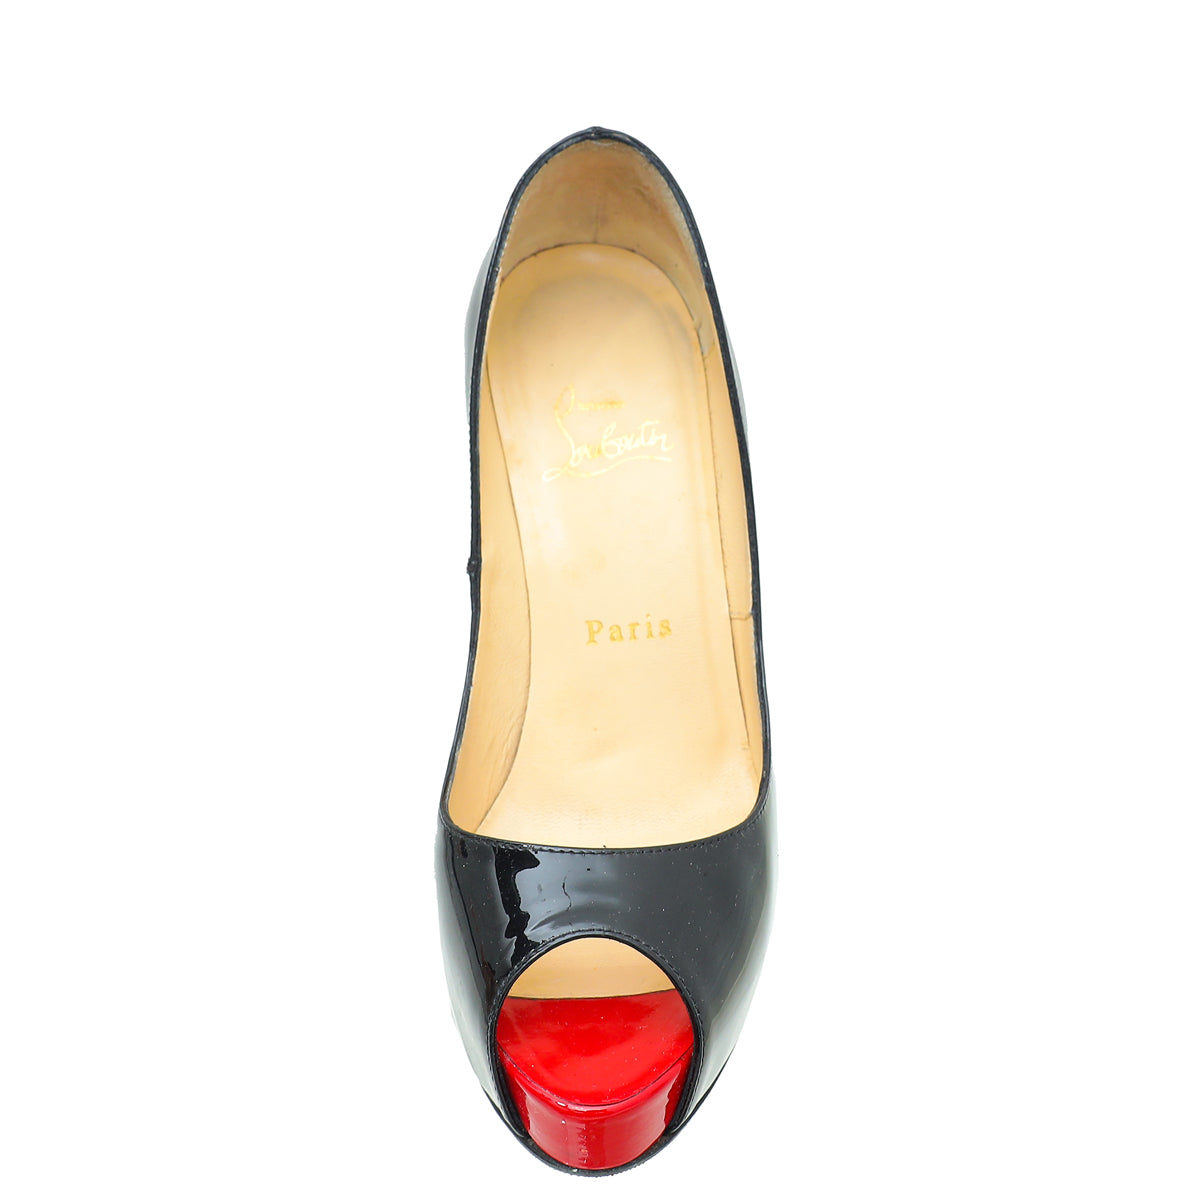 Christian Louboutin Bicolor New Very Prive 120 Pumps 36.5